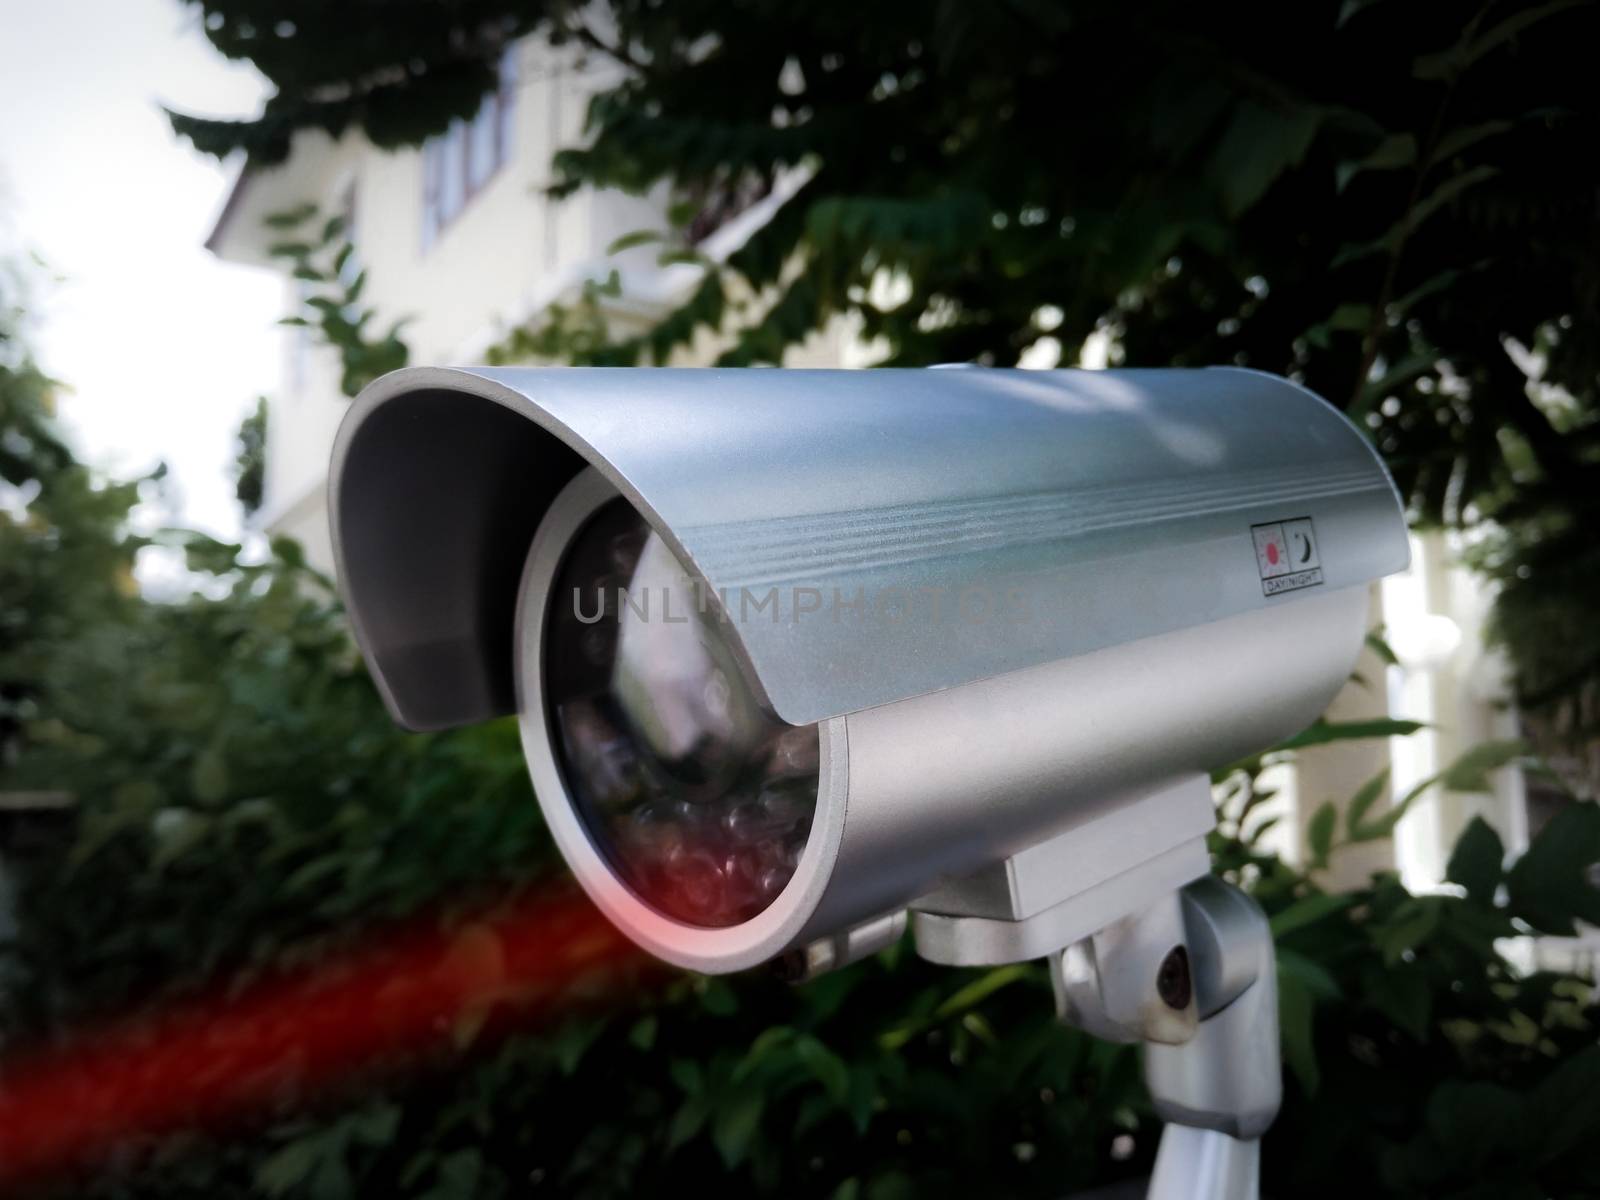 Home Security Camera with Infrared Vision in Daylight